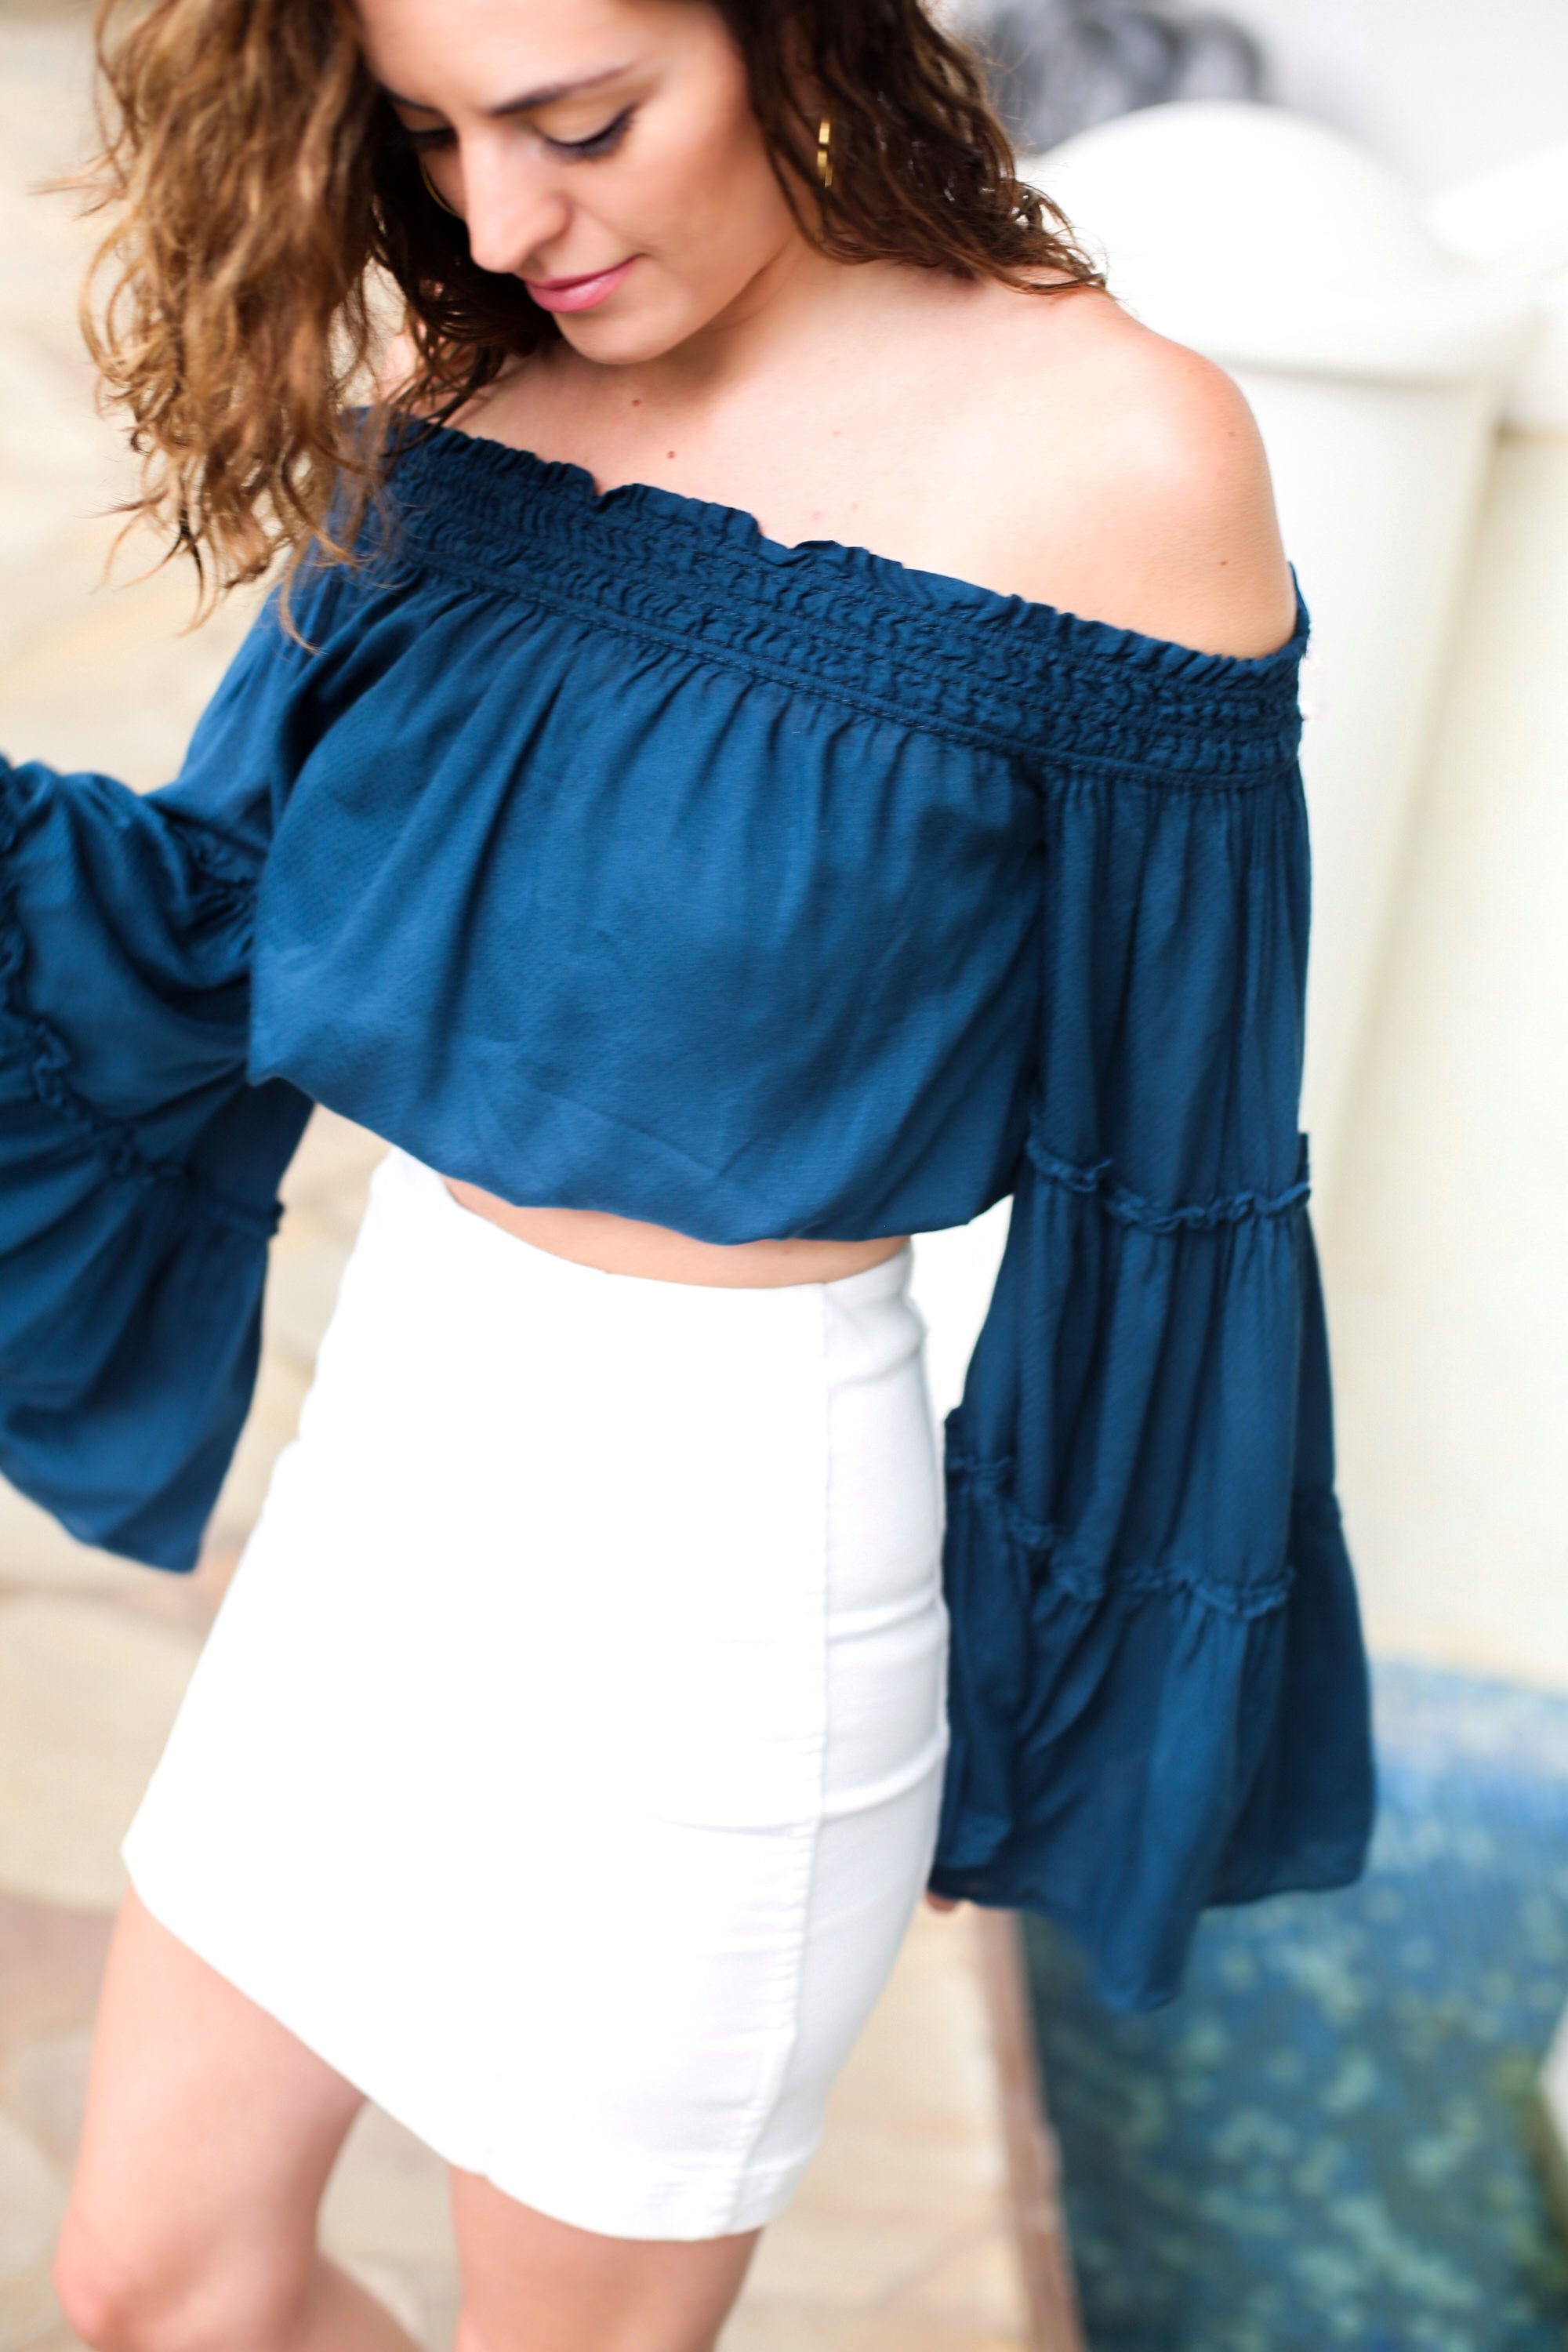 bell sleeves, white denim mini skirt, Free People Free Spirit Ruffle Tier Off The Shoulder Blouse, south moon under, maui happy hour, Free People Modern Femme Mini Skirt, summer outfit ideas, spring outfit ideas, how to style a mini skirt, how to wear bell sleeves